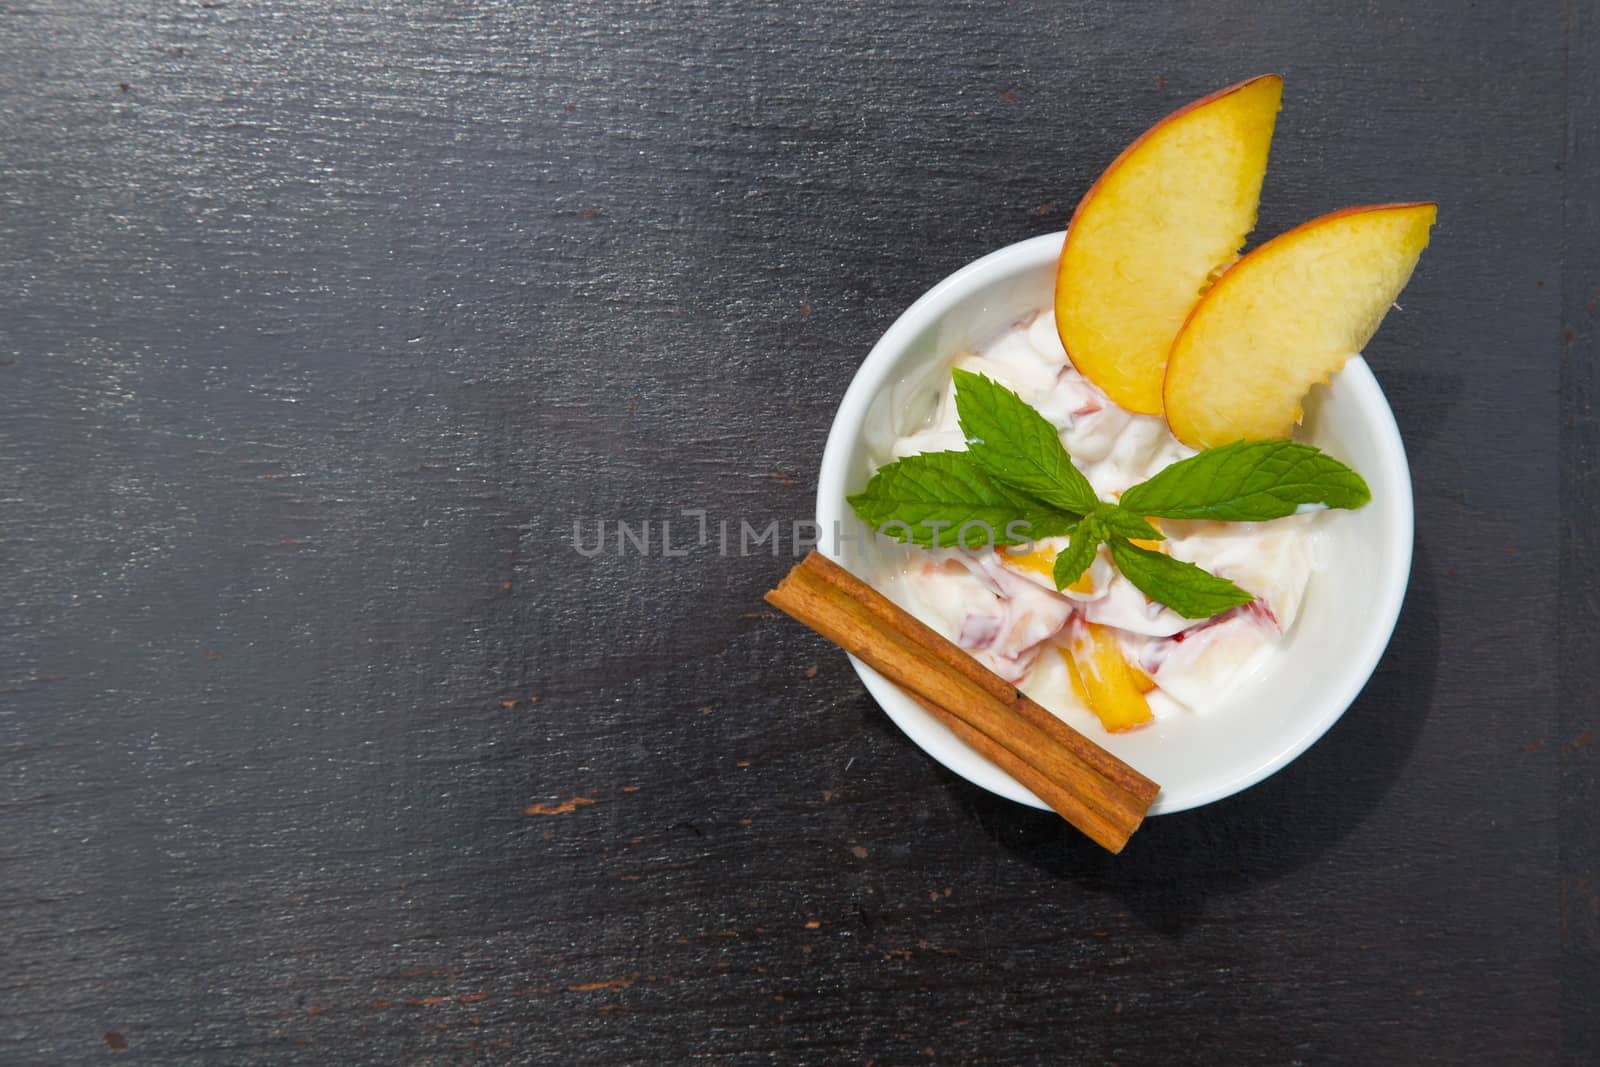 Homemade peach yogurt in a white dish on the black wooden surface. Decorated with two slices of fresh peach, fresh peppermint leaves and cinnamon sticks. Top view. Free space for a text